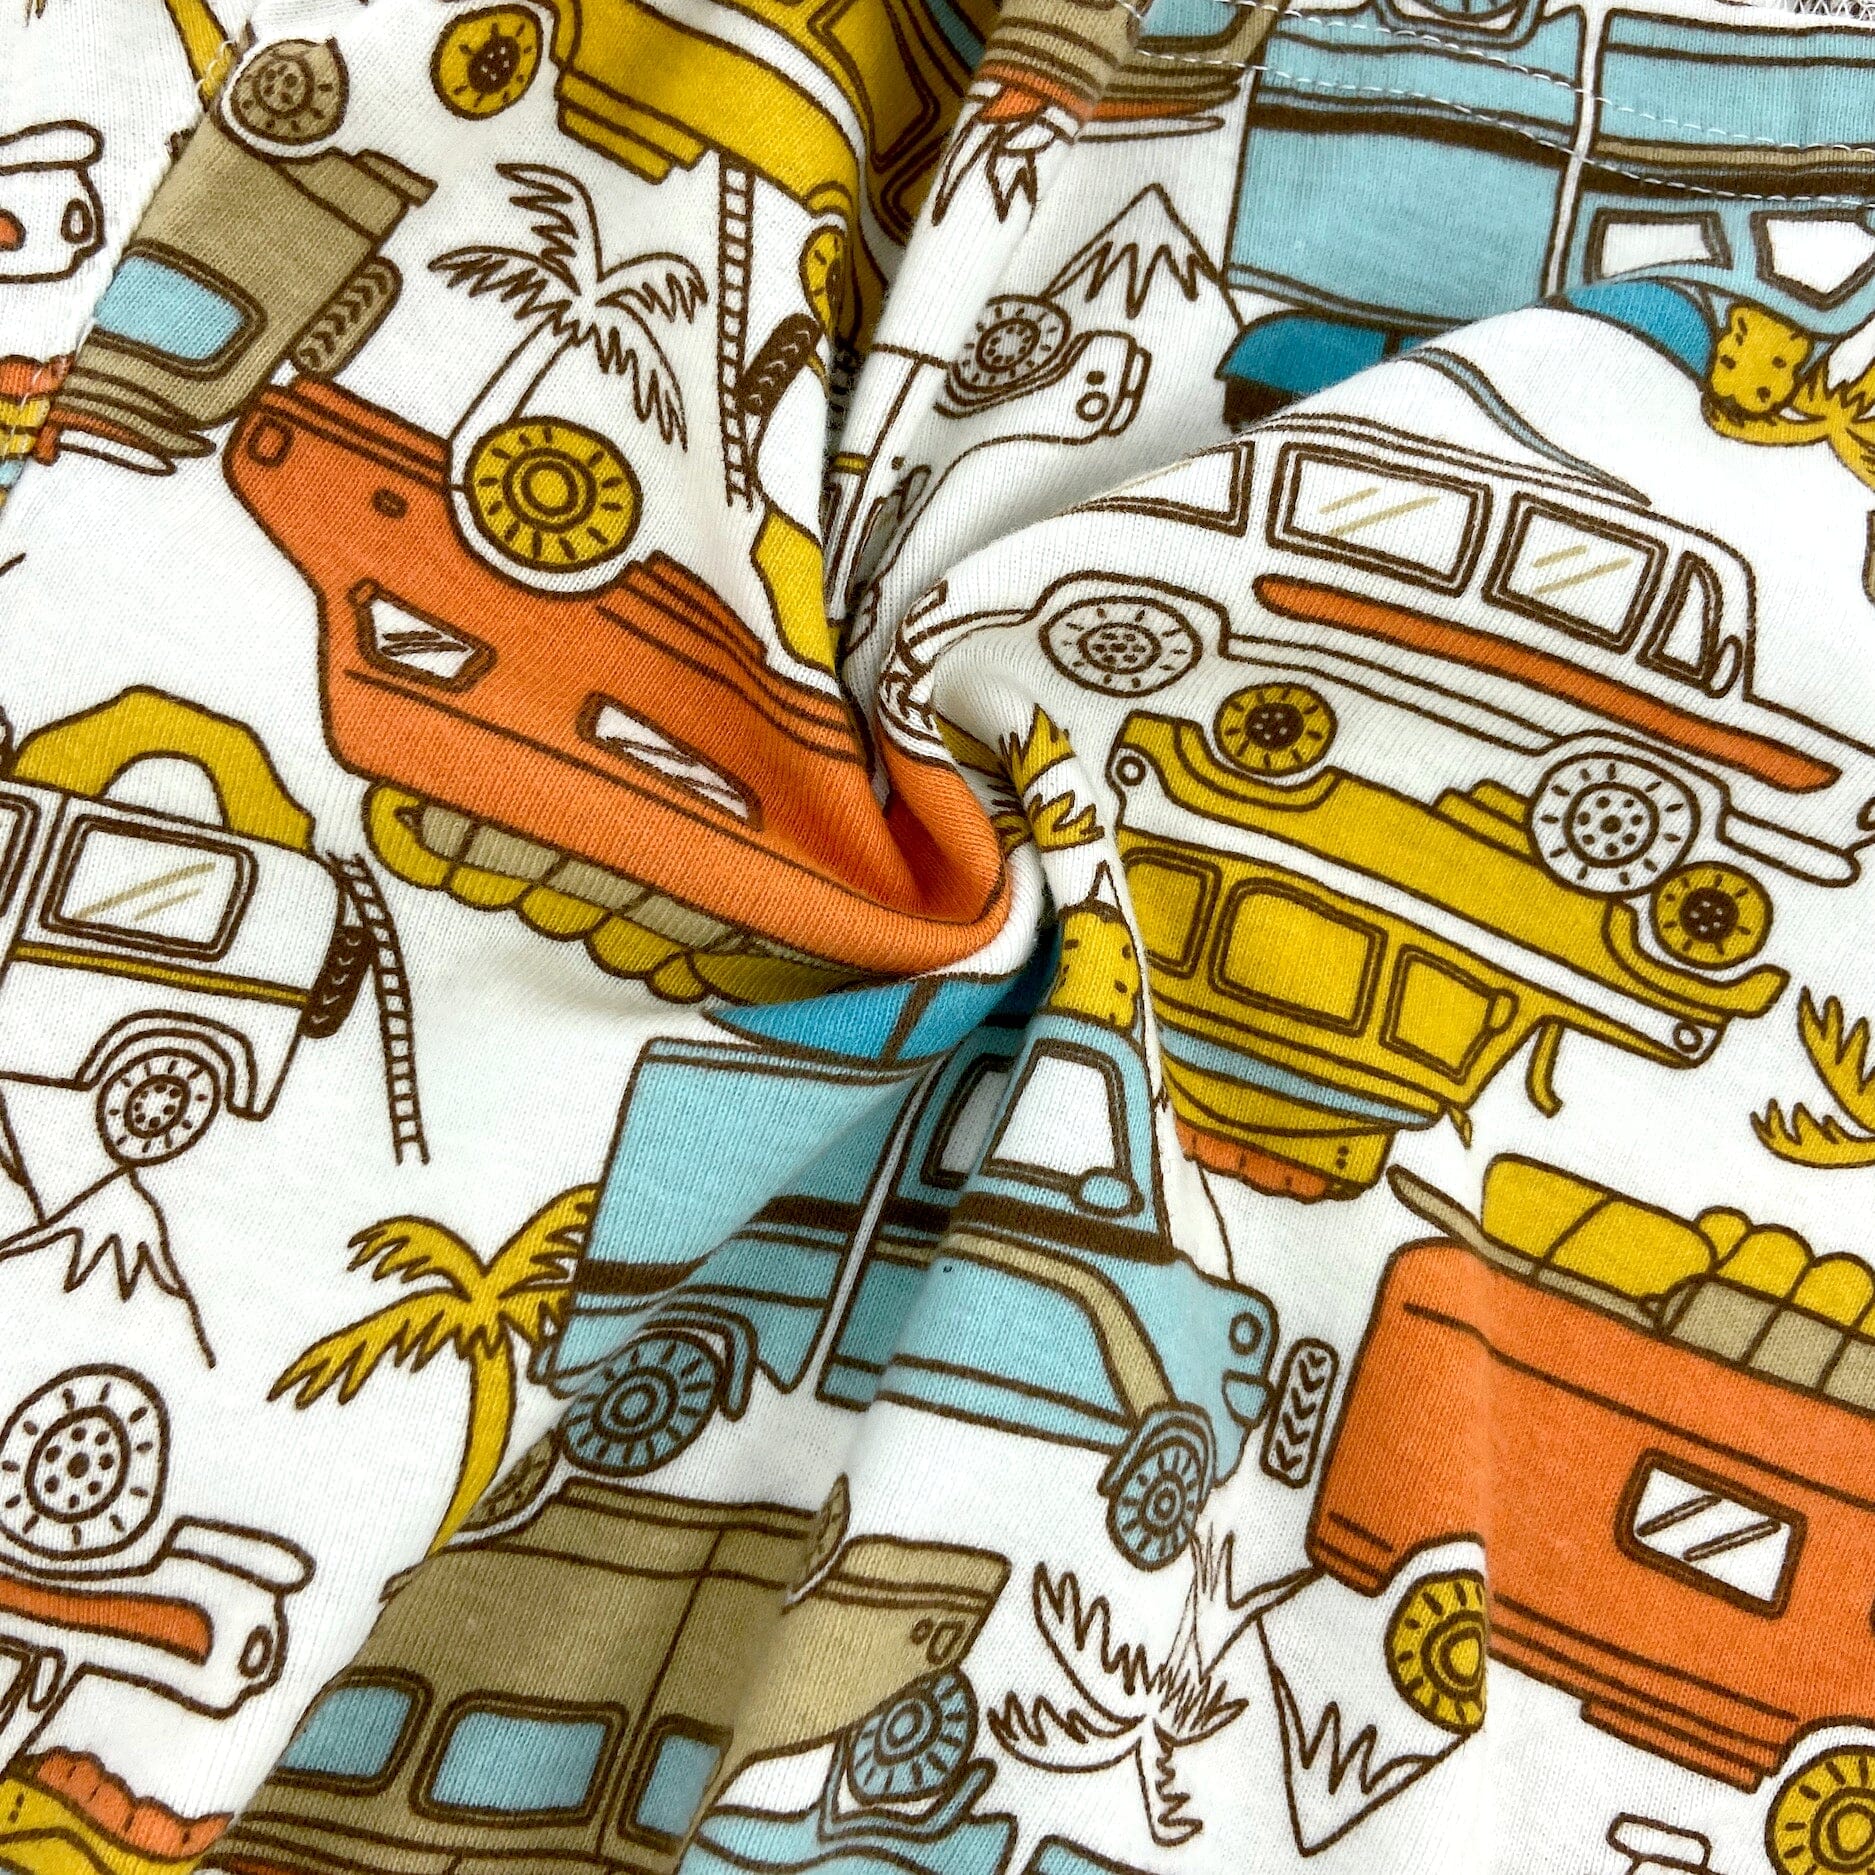 Comfy Travel Inspired Cars and Wagons Patterned Cotton Pajama Shorts